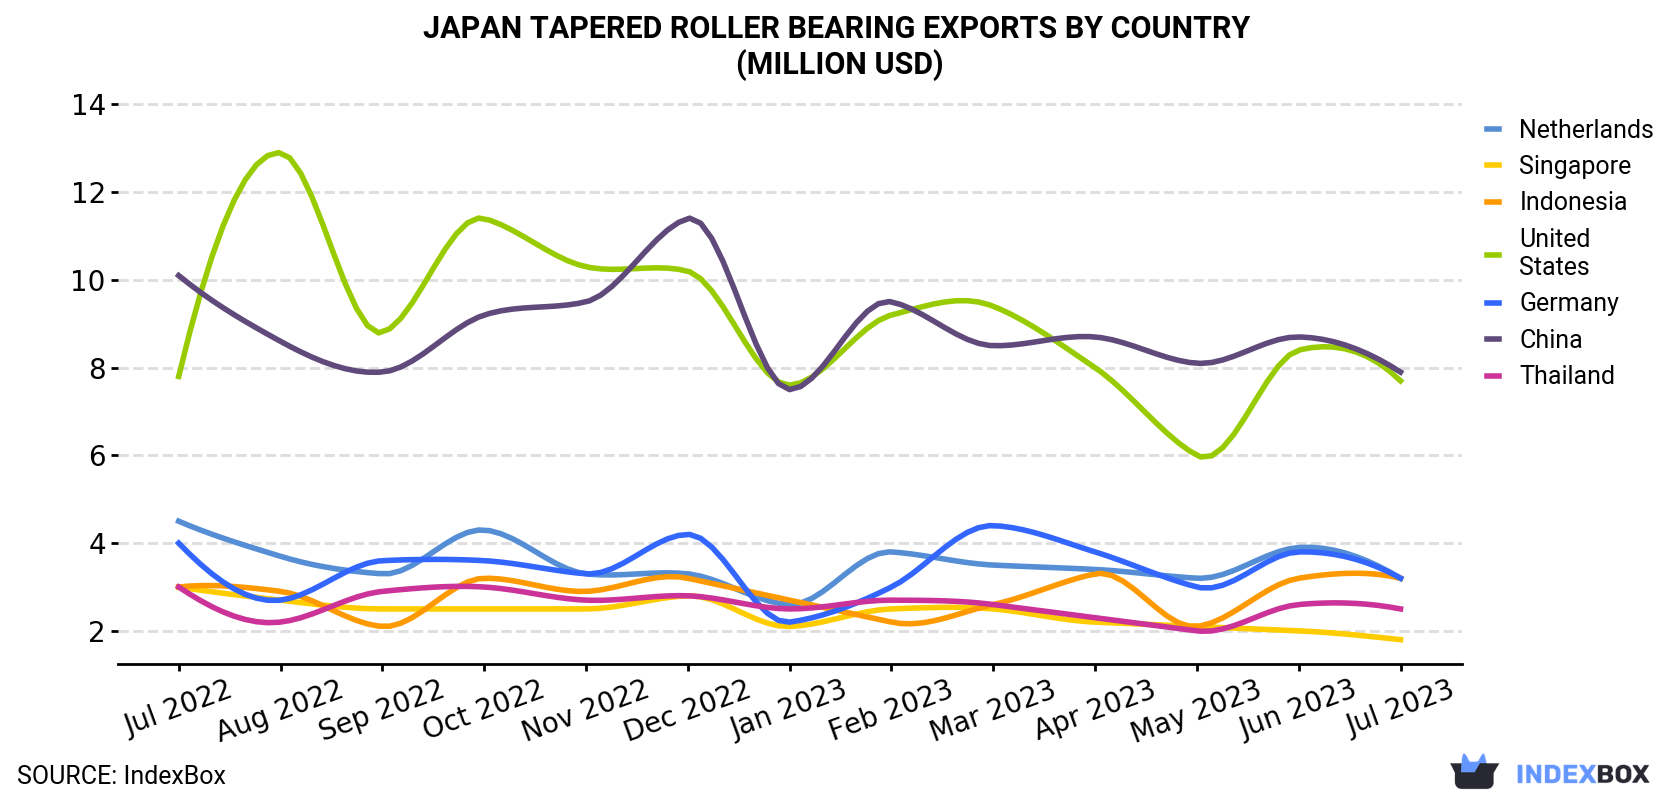 Japan Tapered Roller Bearing Exports By Country (Million USD)